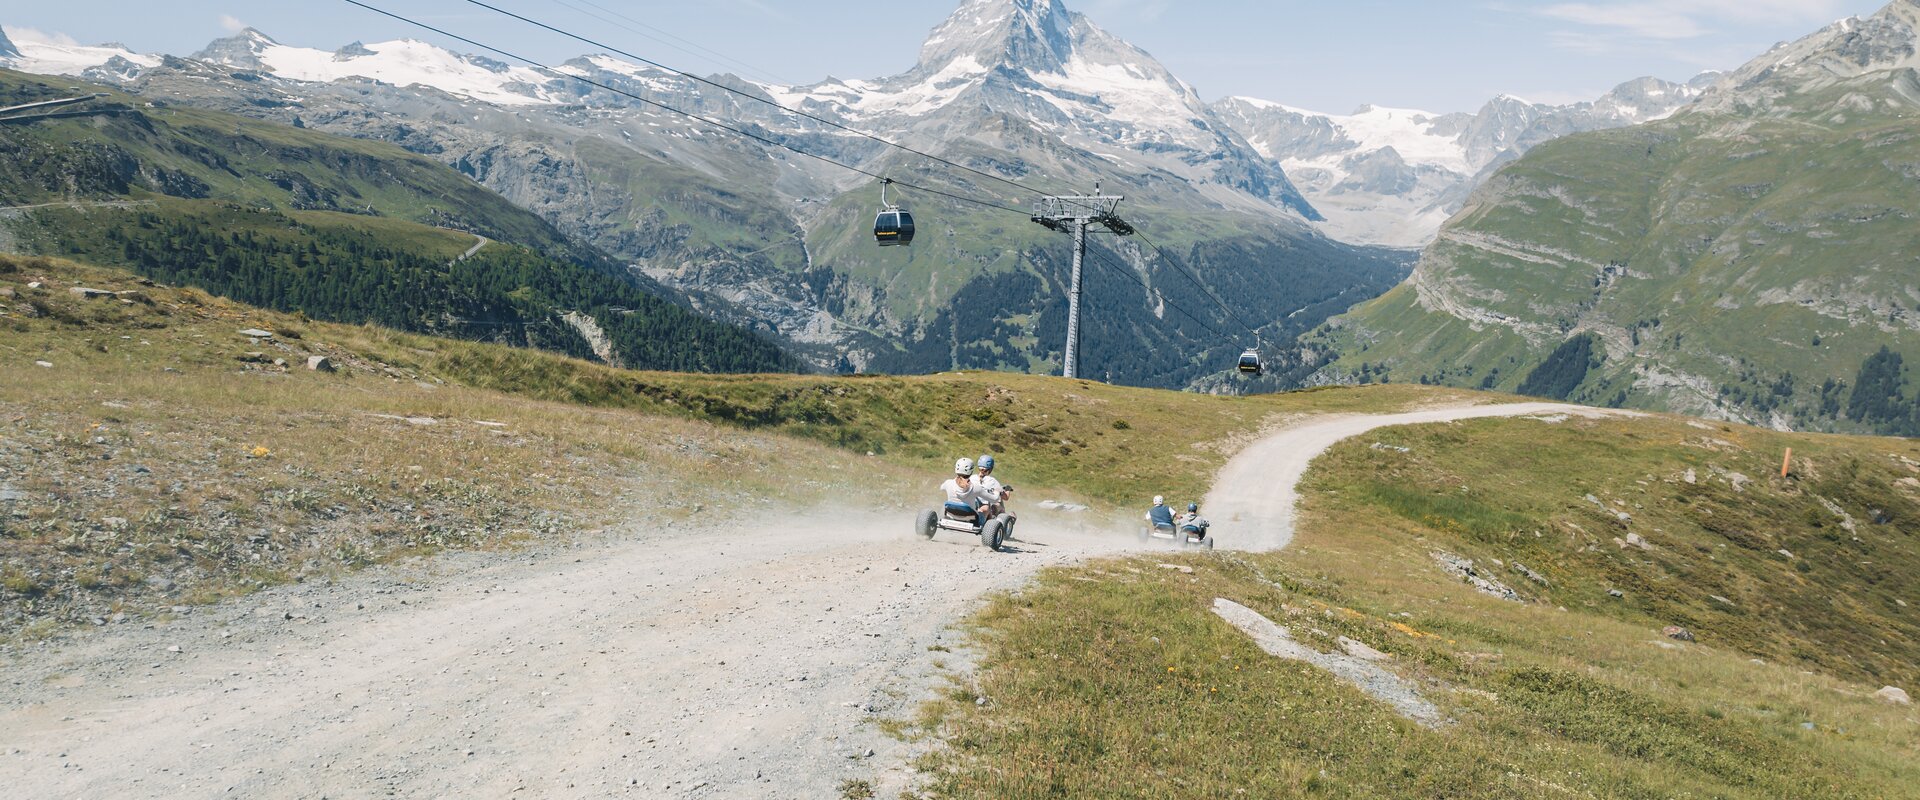 A group jets down the mountain on the mountain carts against the breathtaking backdrop of the Matterhorn.  | © Gabriel Perren